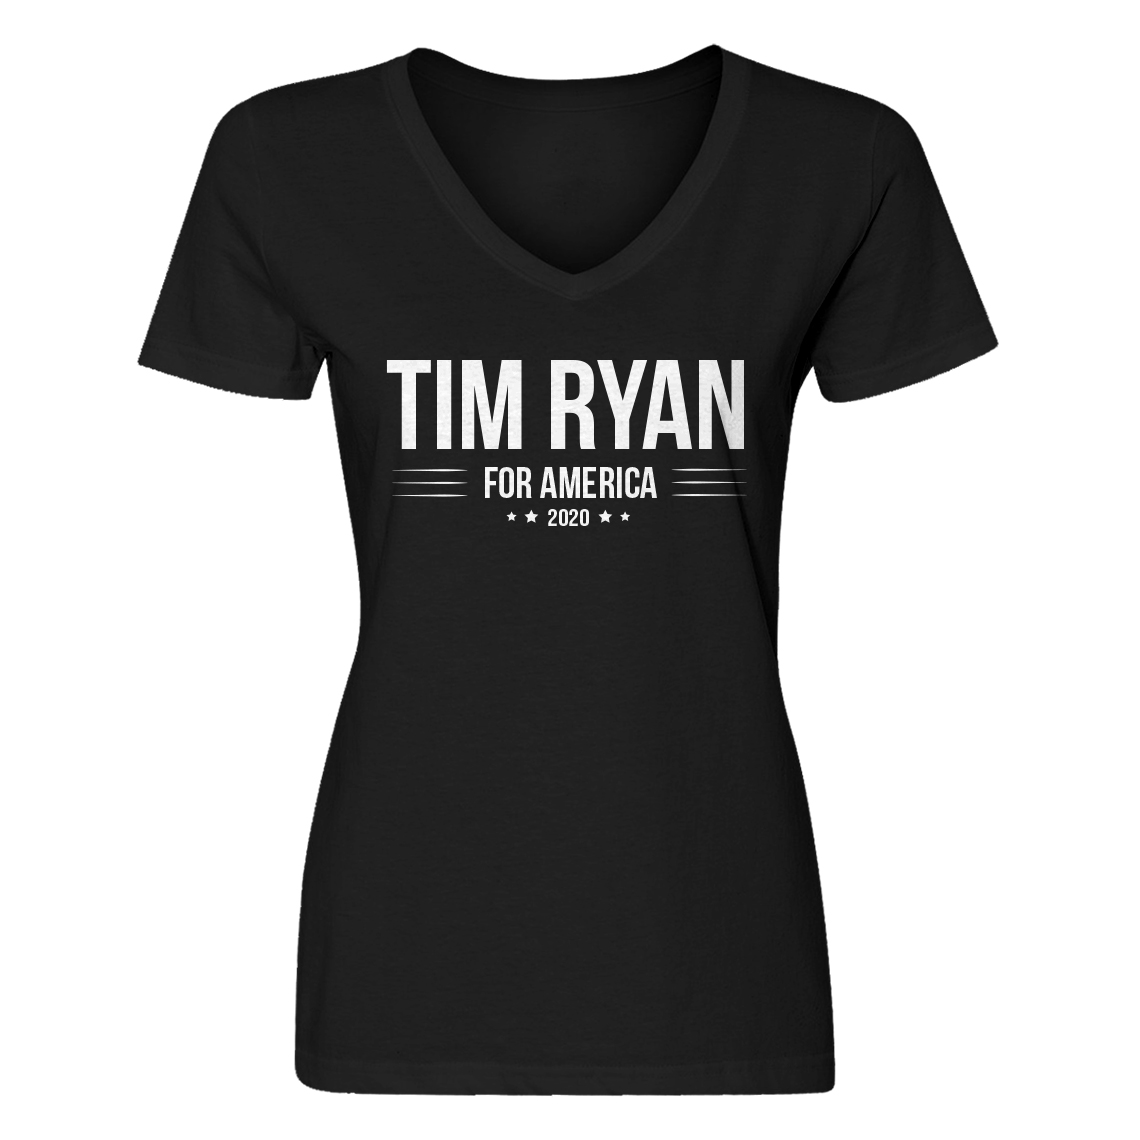 Details about   Womens TIM RYAN for President 2020 V-Neck T-shirt #4062 